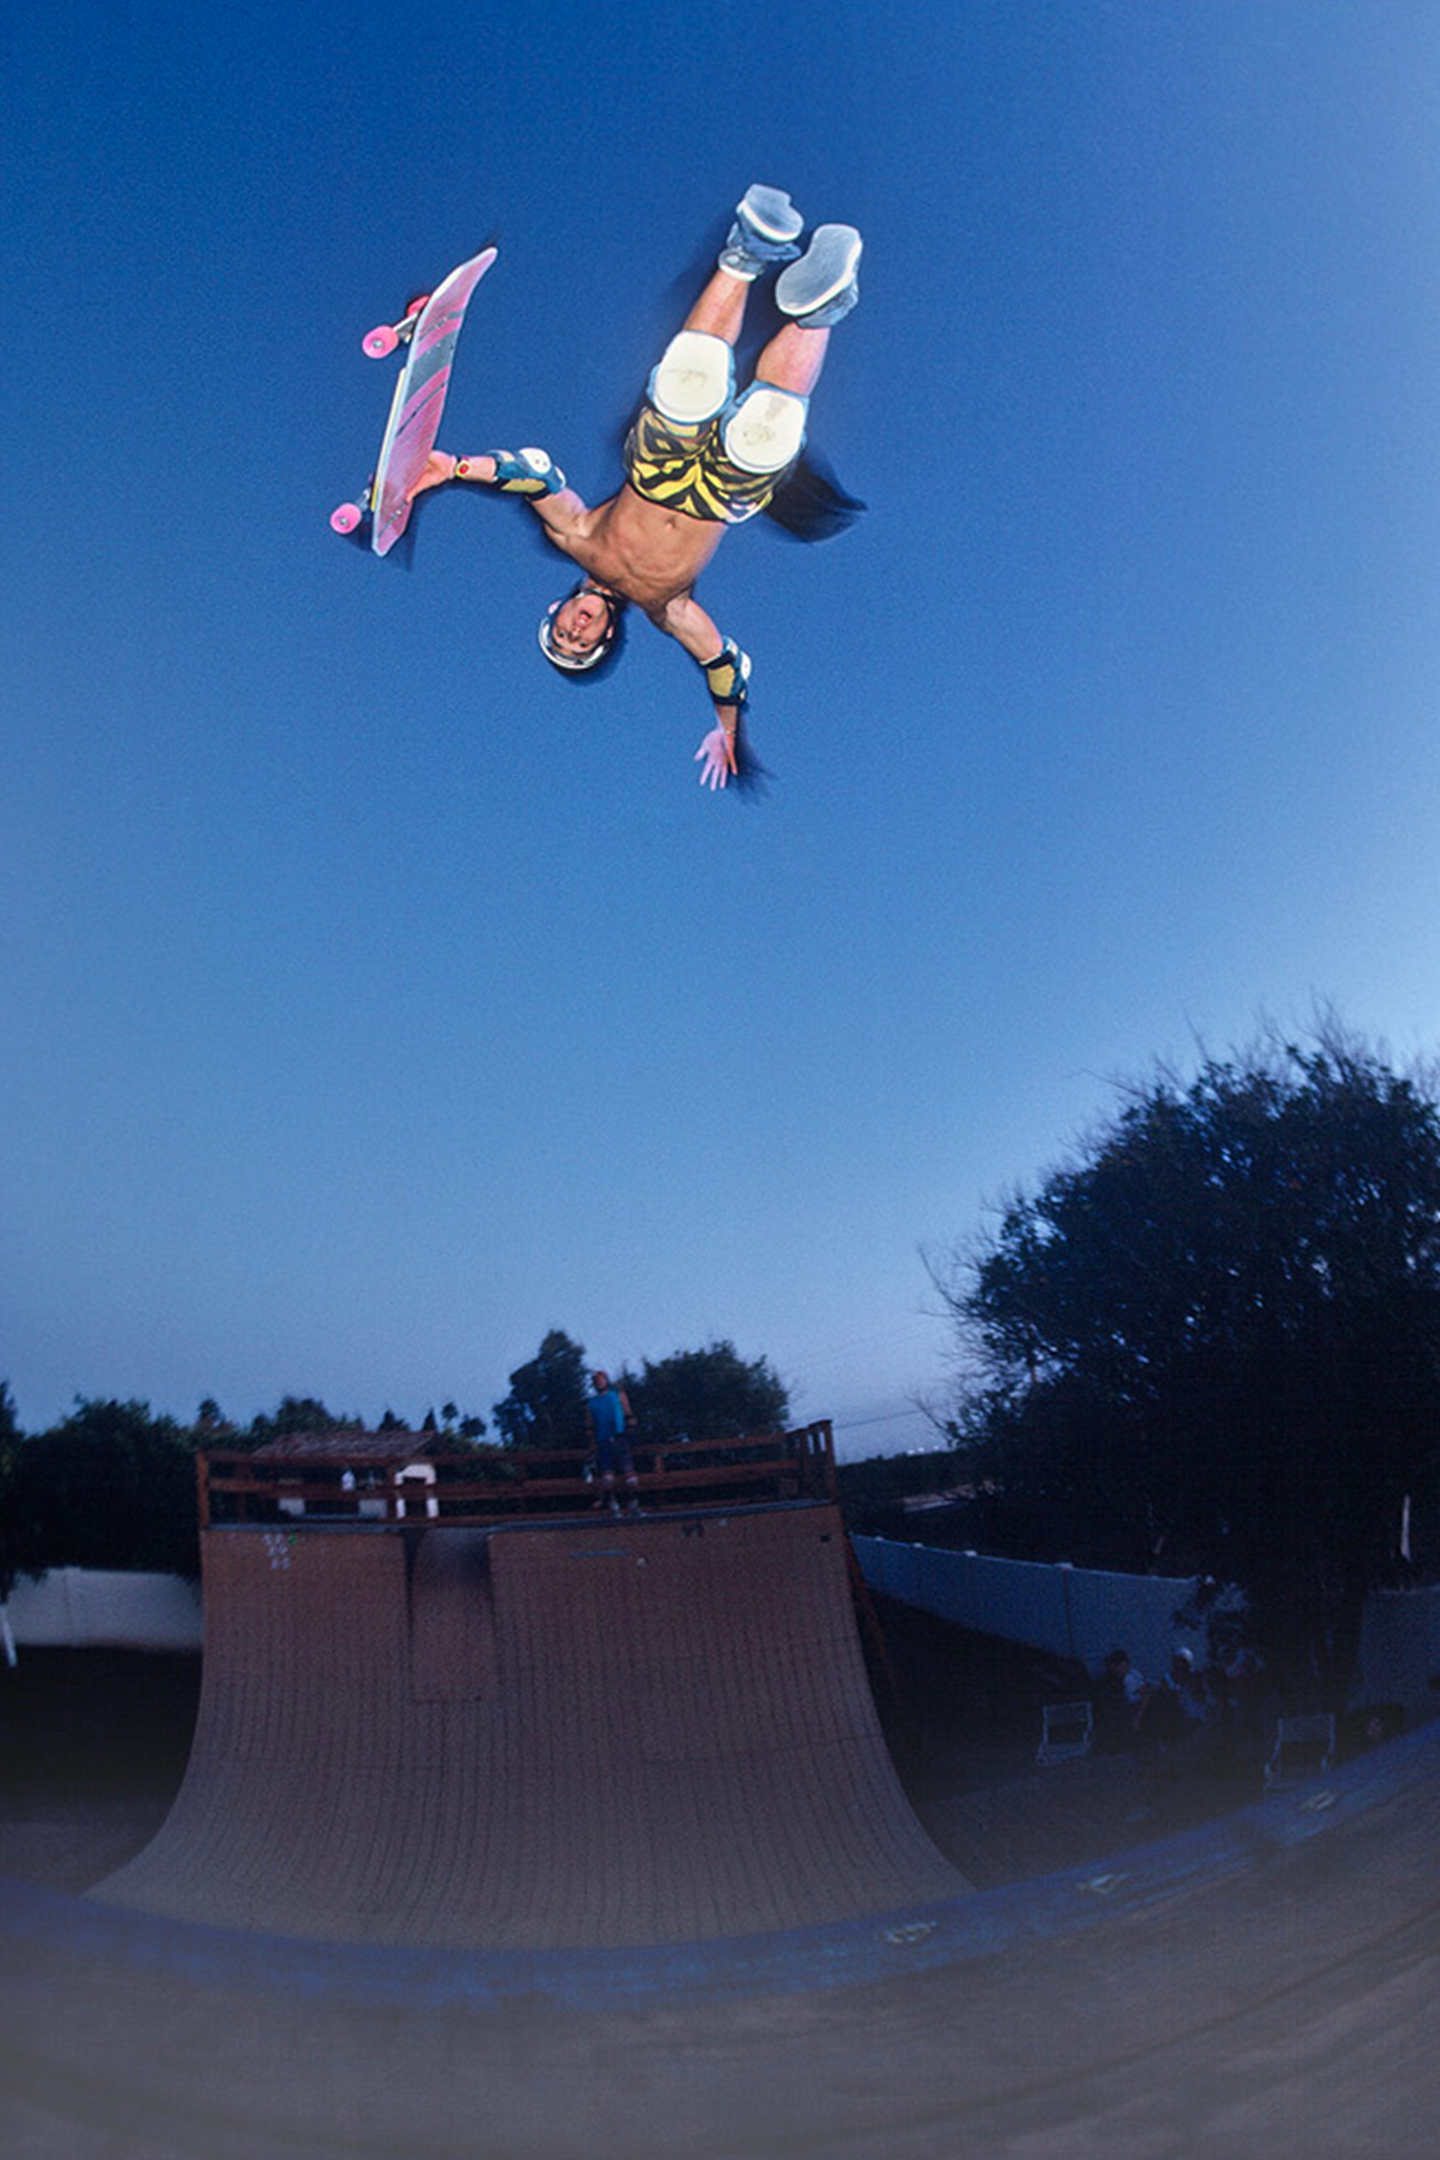 Christian Hosoi, Christ, Air, 1985. Photograph by Grant Brittain. Image Courtesy of The Design Museum